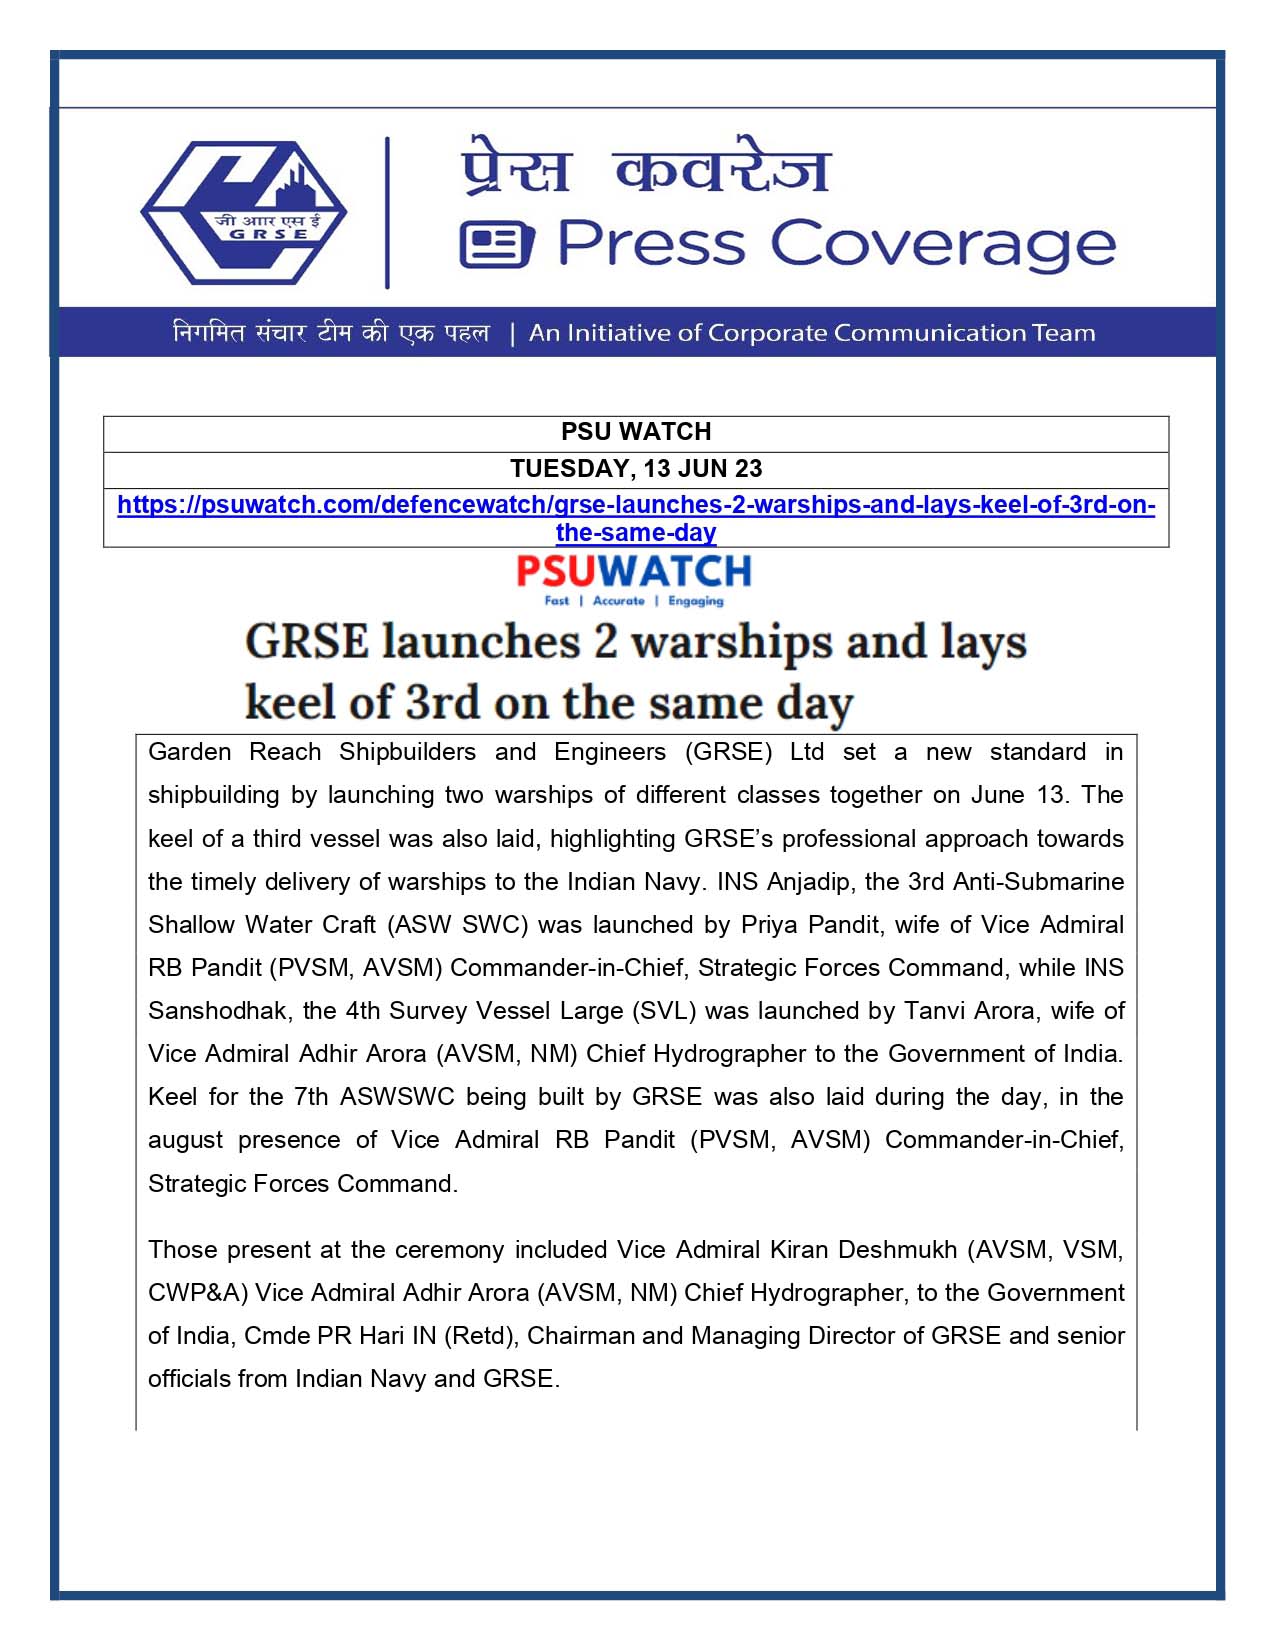 GRSE launches 2 warships and lays keel of 3rd on the same day